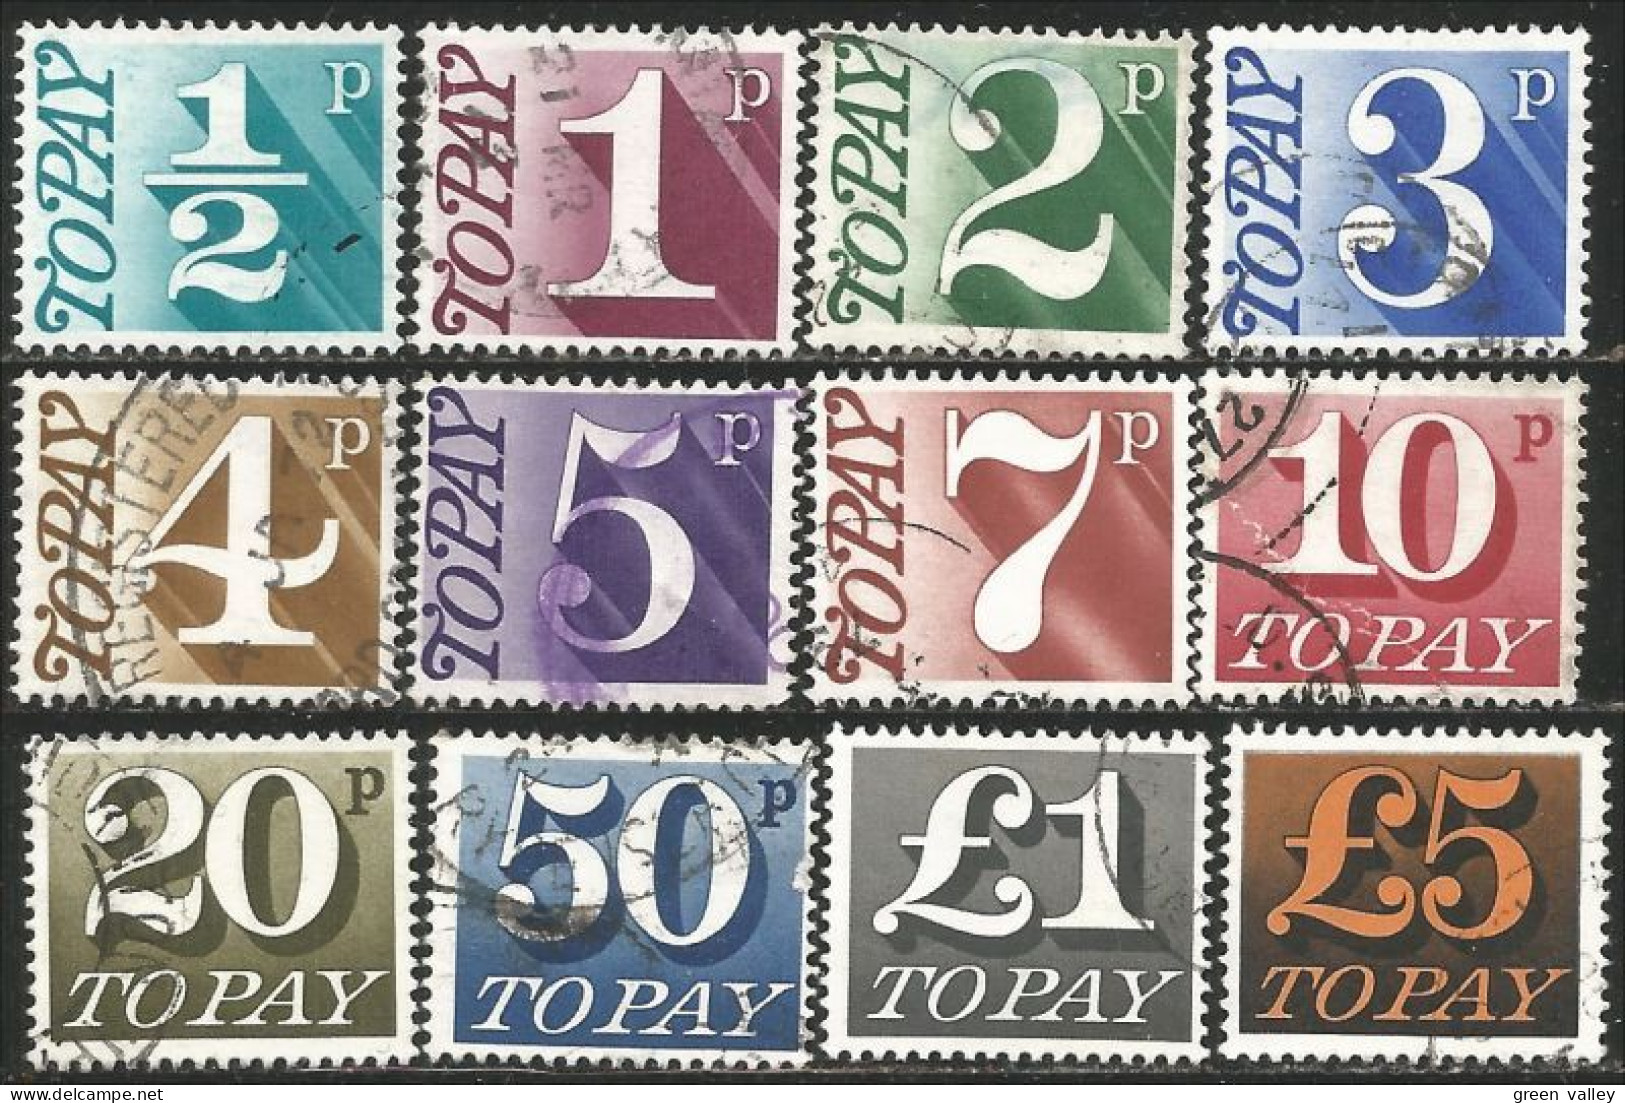 410 G-B 1970-75 Postage Dues Lightly Cancelled (GB-239) - Tasse